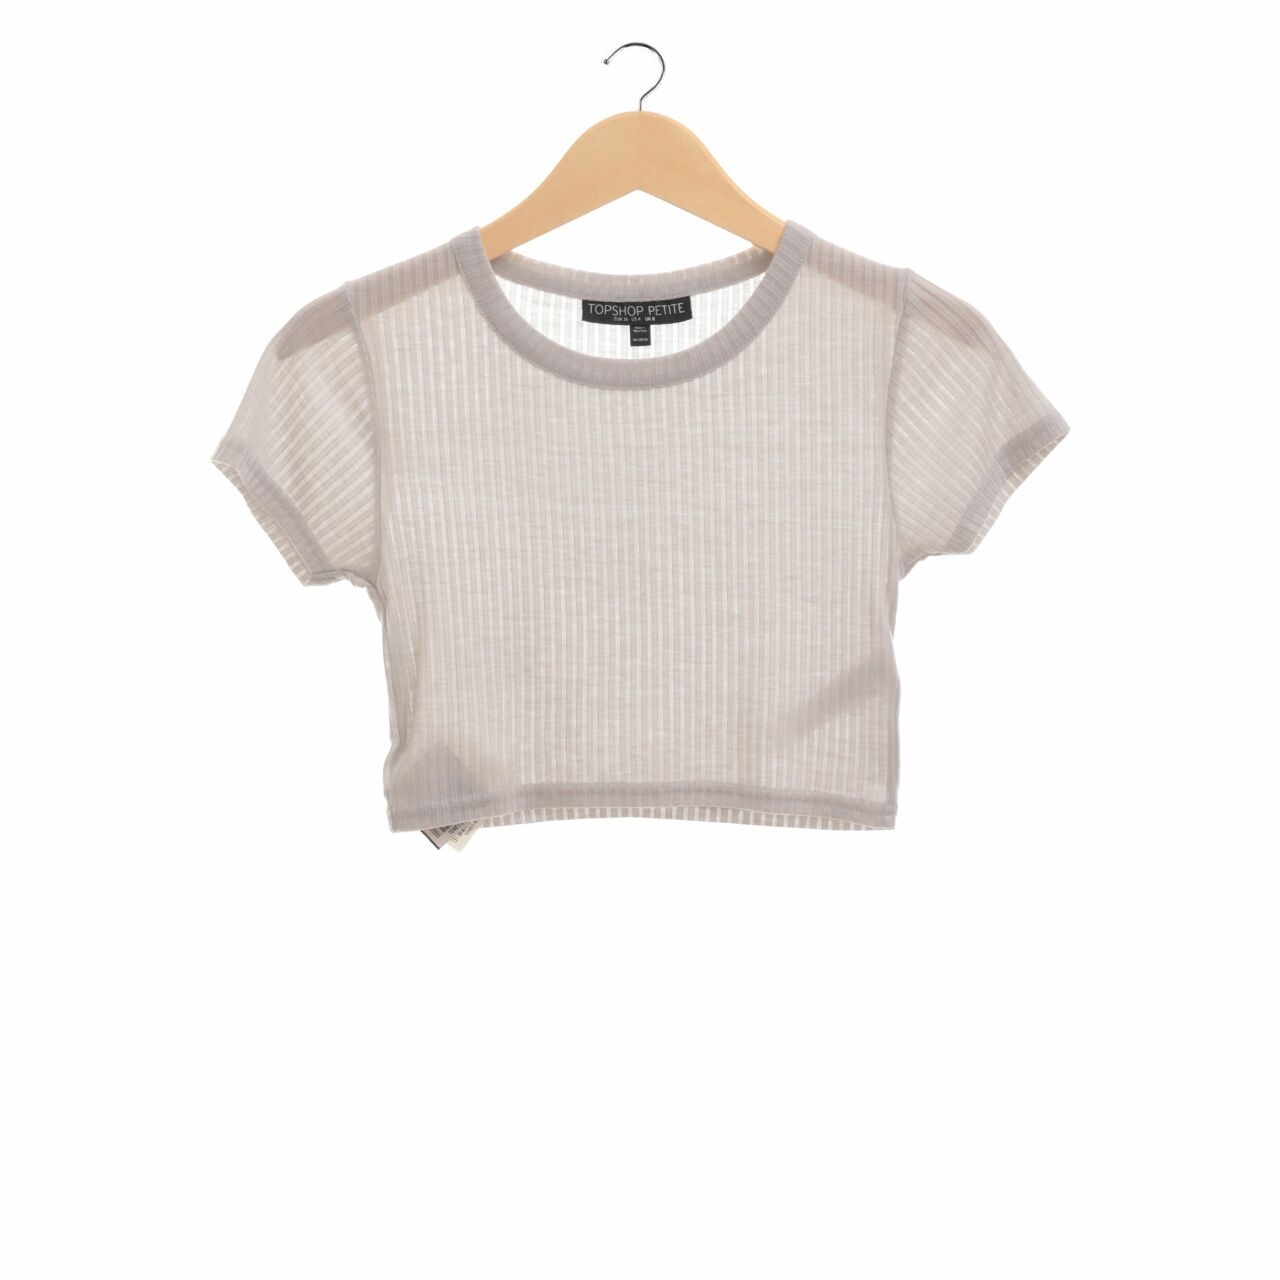 Topshop Grey Cropped Blouse